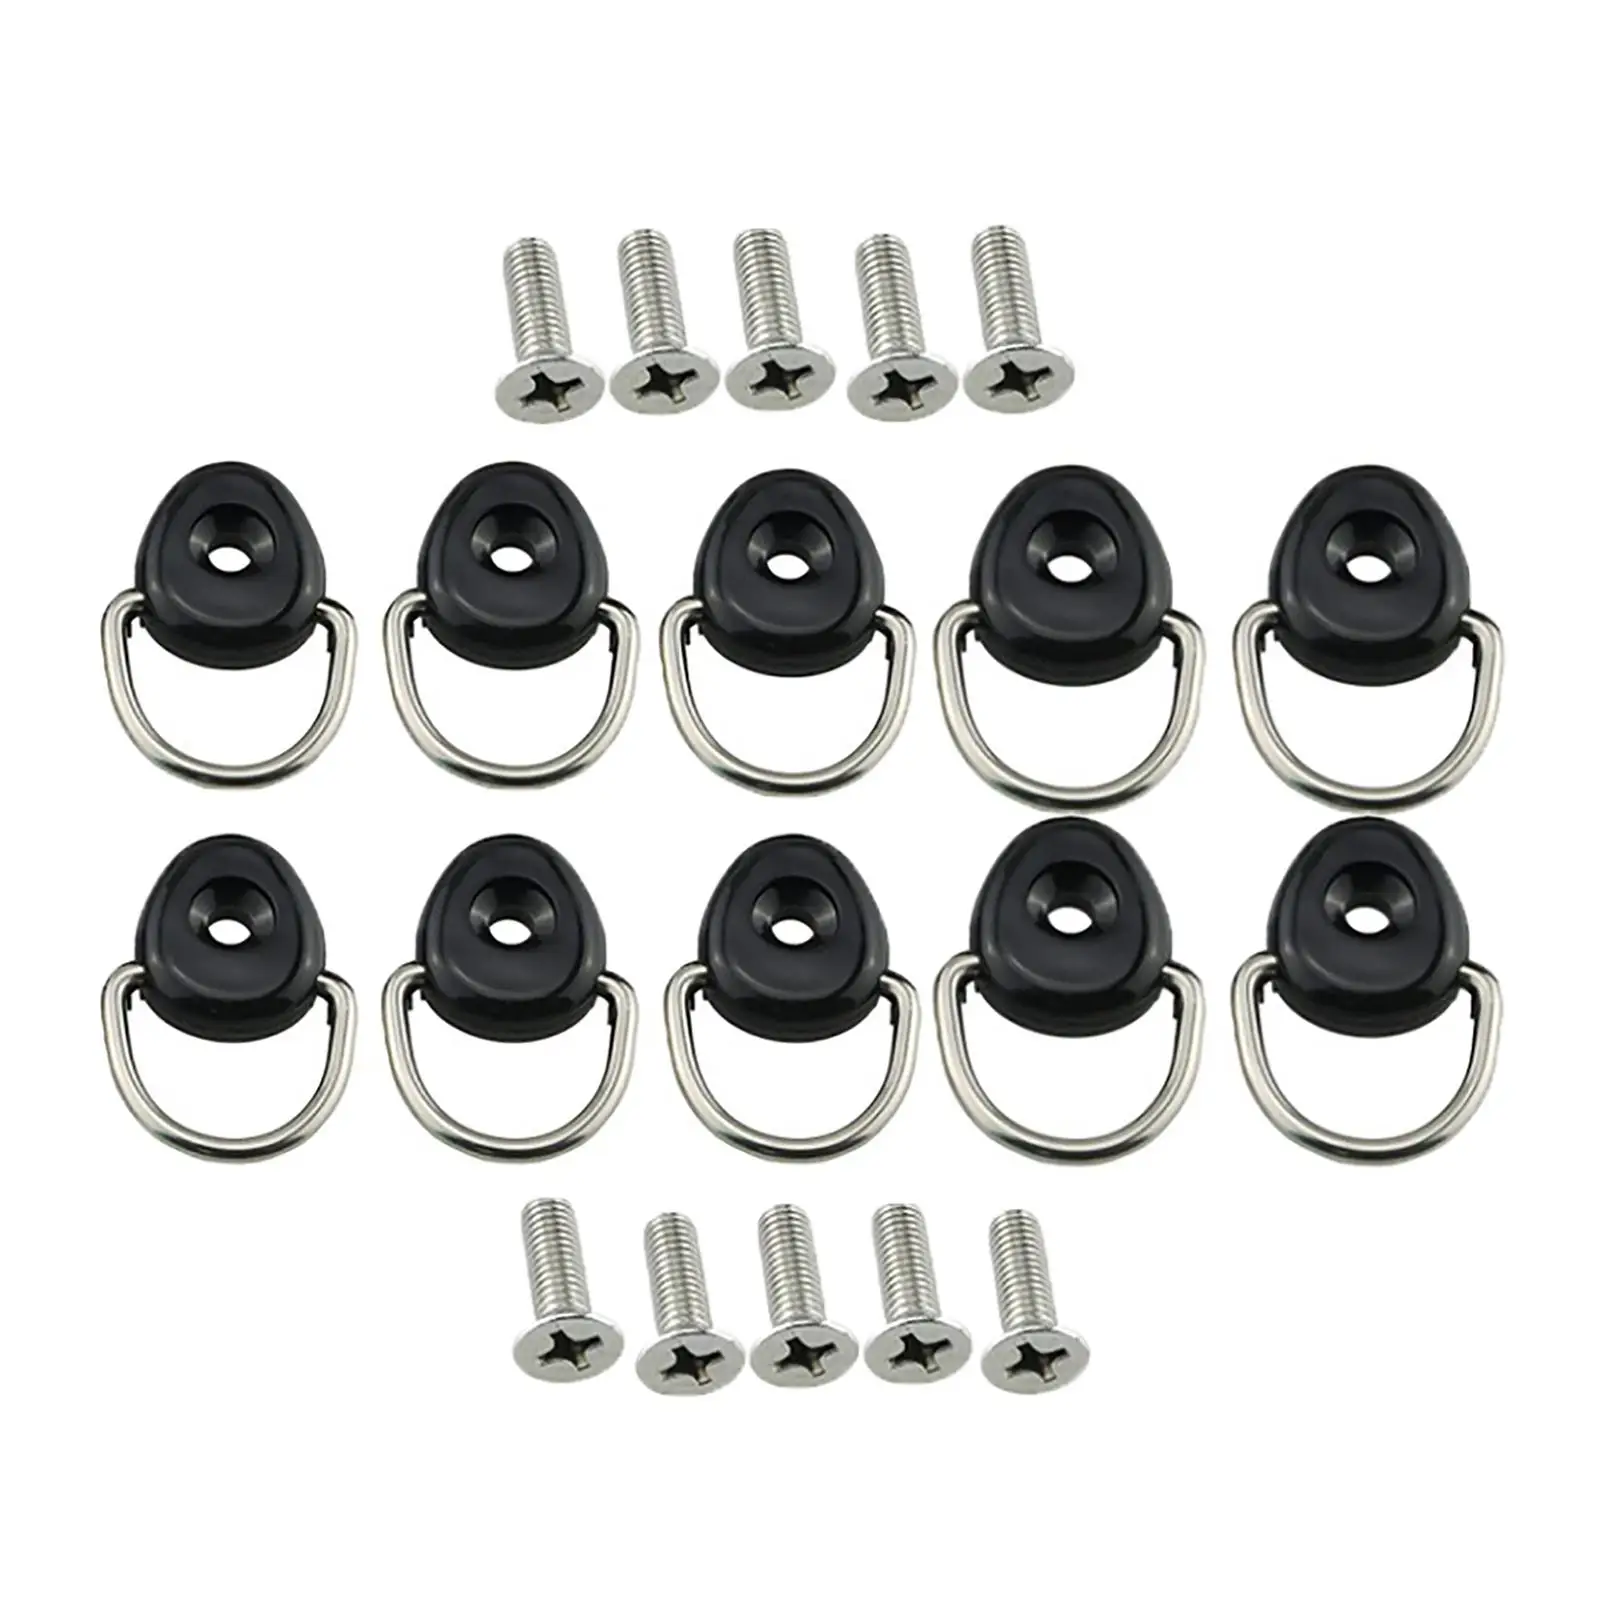 Kayak D, 10pcs Quality Durable Kayak Canoe Boat D  Loop Safety Deck Fitting with Screws